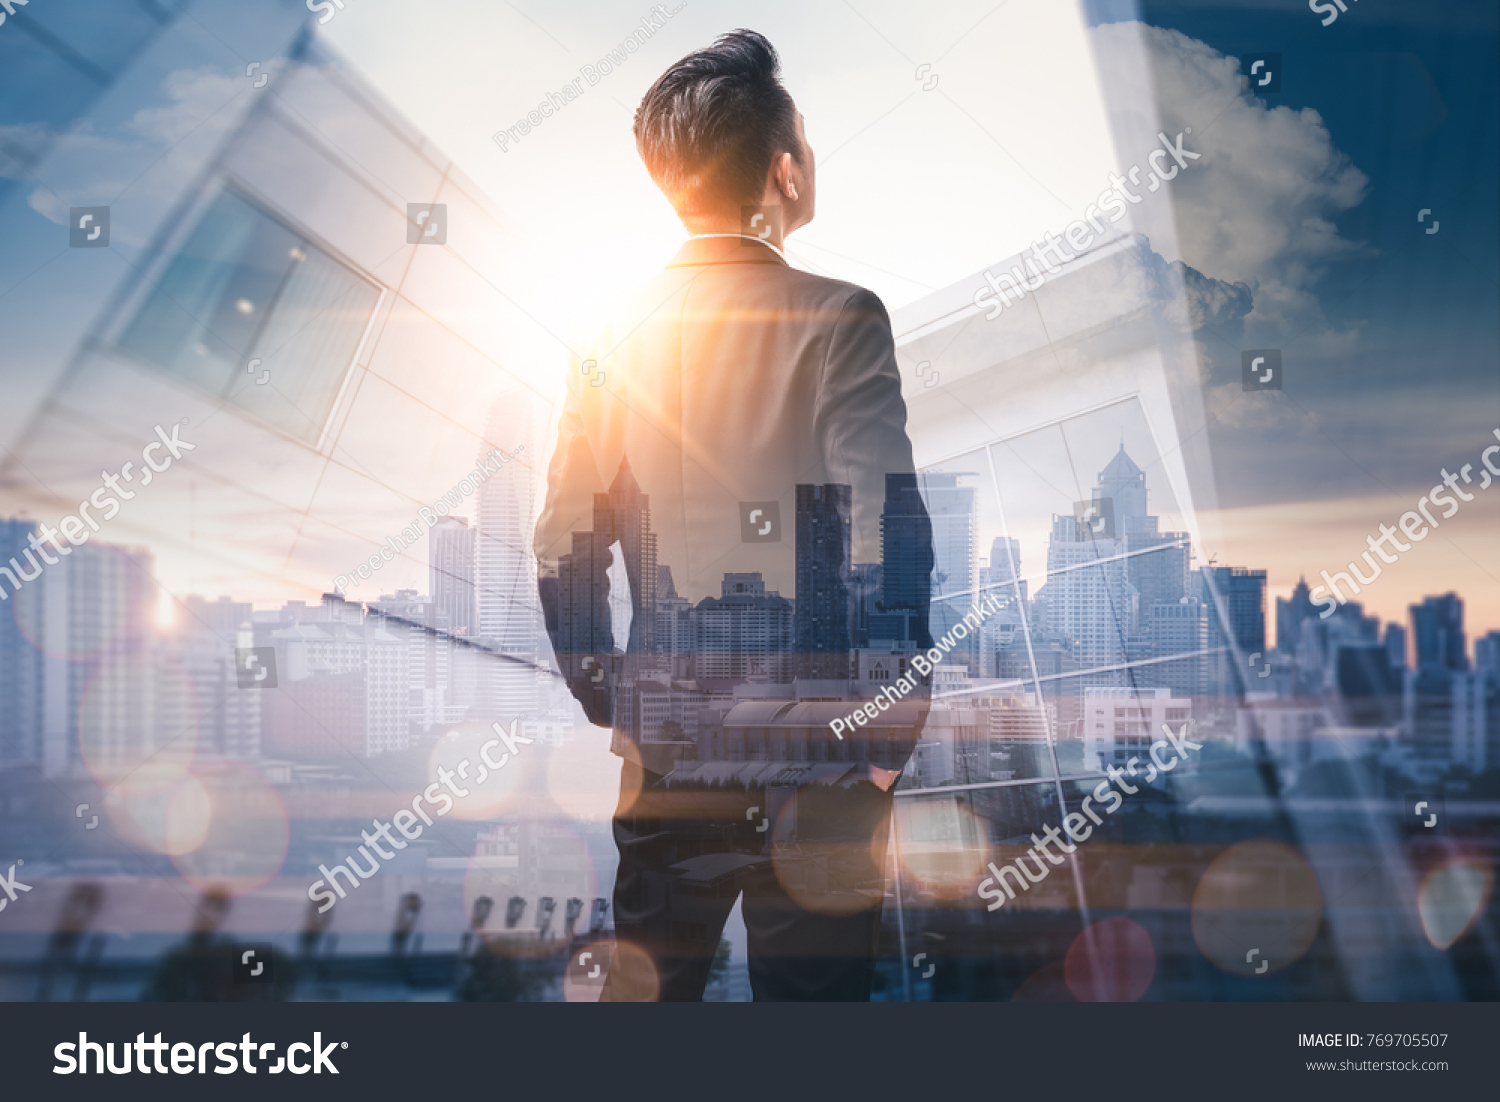 The double exposure image of the business man standing back during sunrise overlay with cityscape image. The concept of modern life, business, city life and internet of things. #769705507